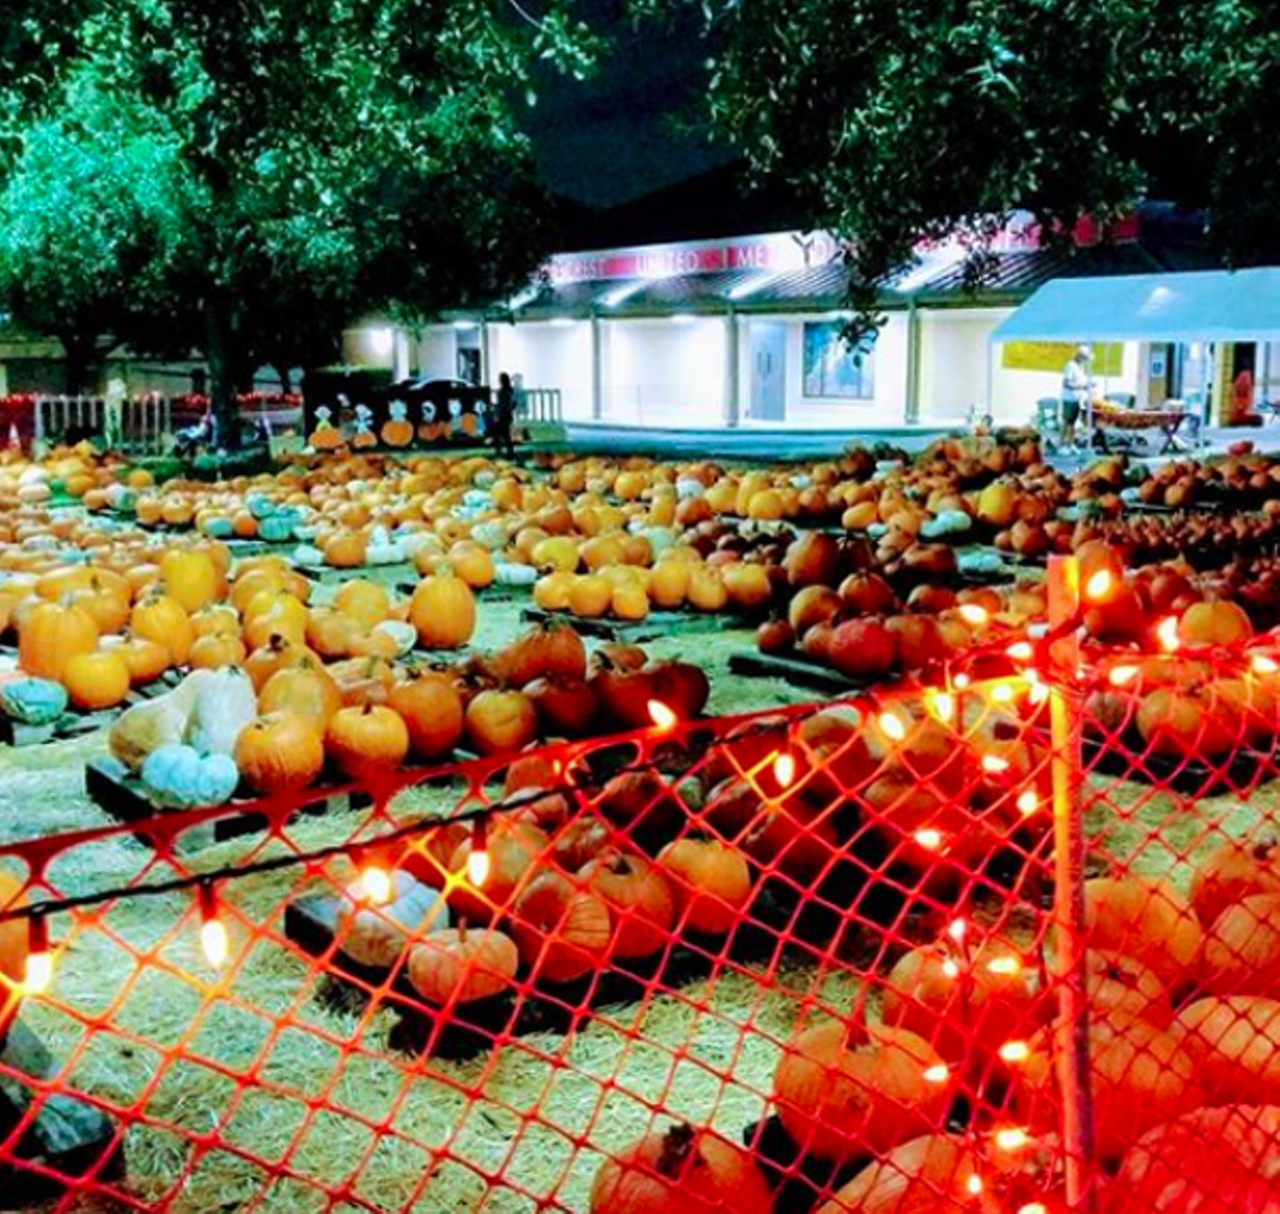 Windcrest United Methodist Church
8101 Midcrown, Windcrest, Texas, (210) 654-0404, windcrestumc.org
Located off Walzem Road, this pumpkin patch is open daily through Halloween — or until they run out of pumpkins. Fall activities include the Sppokley the Square Pumpkin Story Walk, and a movie night on October 23.
Photo via Instagram / moinsatx